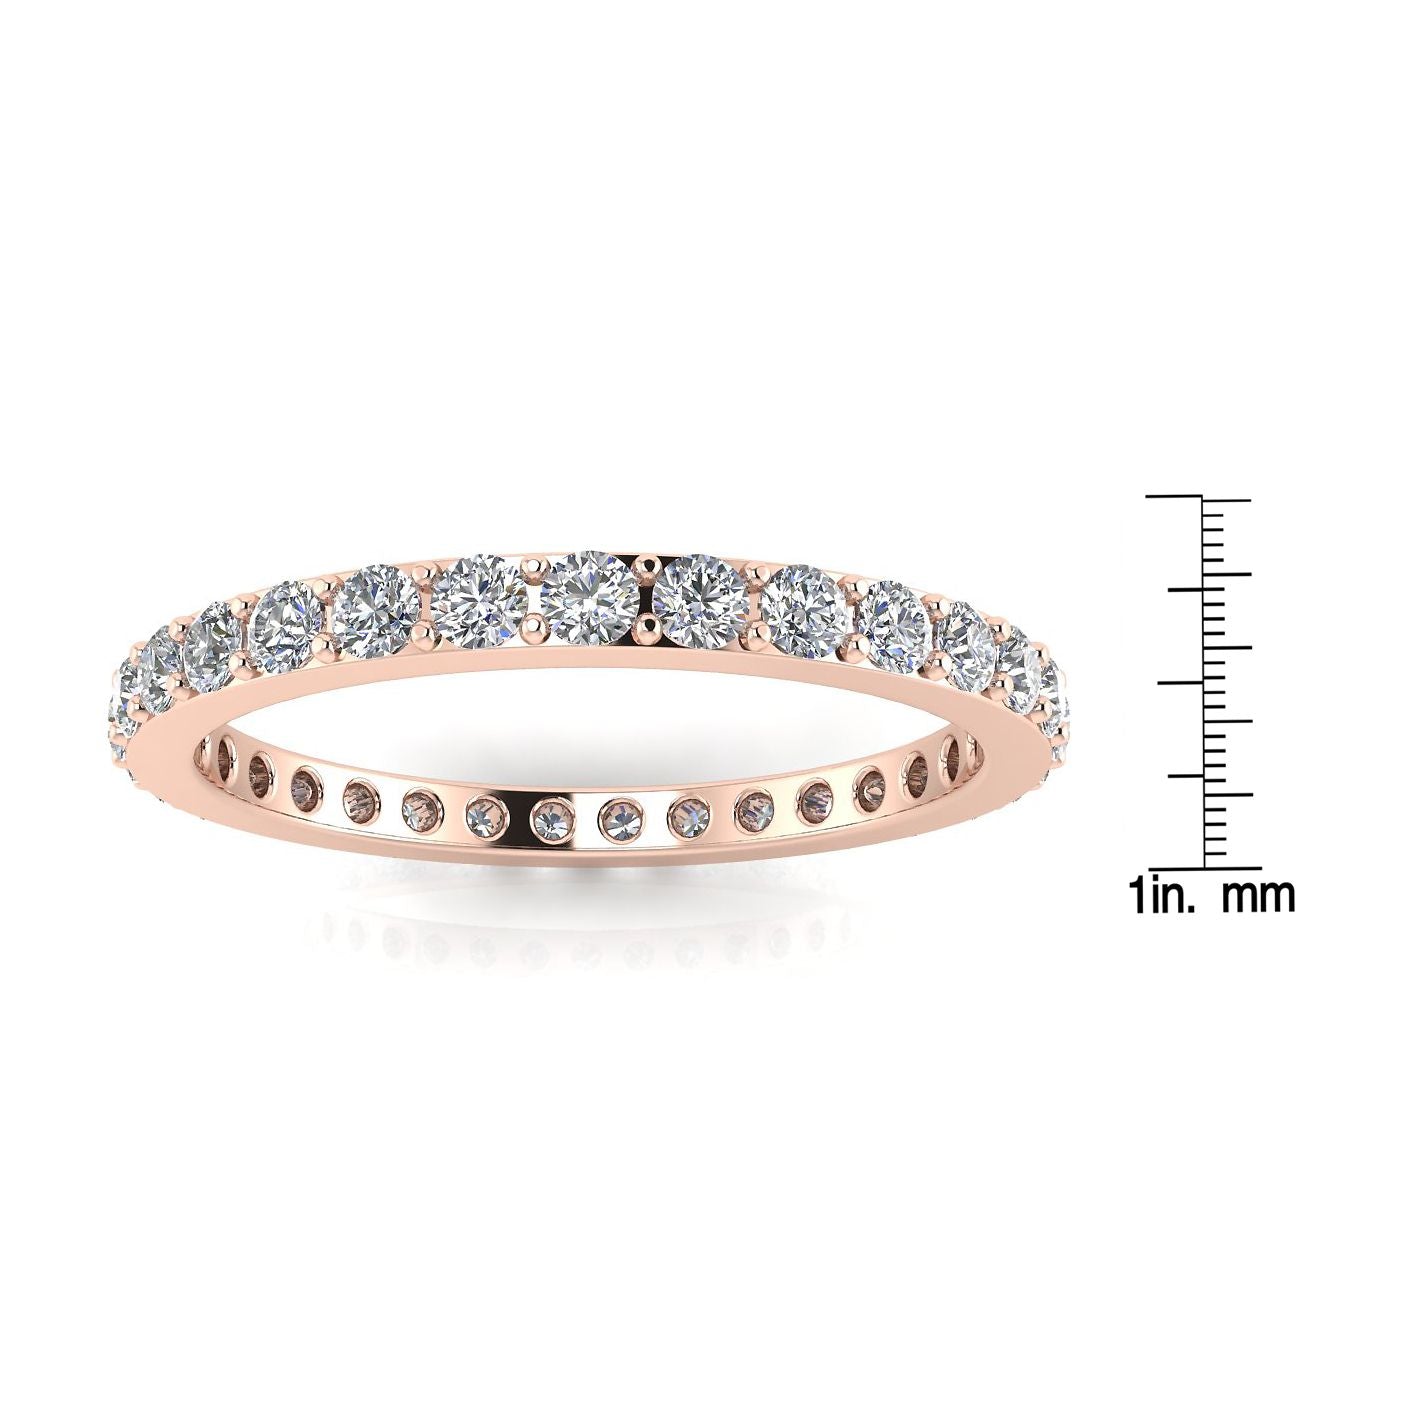 Round Brilliant Cut Diamond Pave Set Eternity Ring In 14k Rose Gold  (1.49ct. Tw.) Ring Size 7